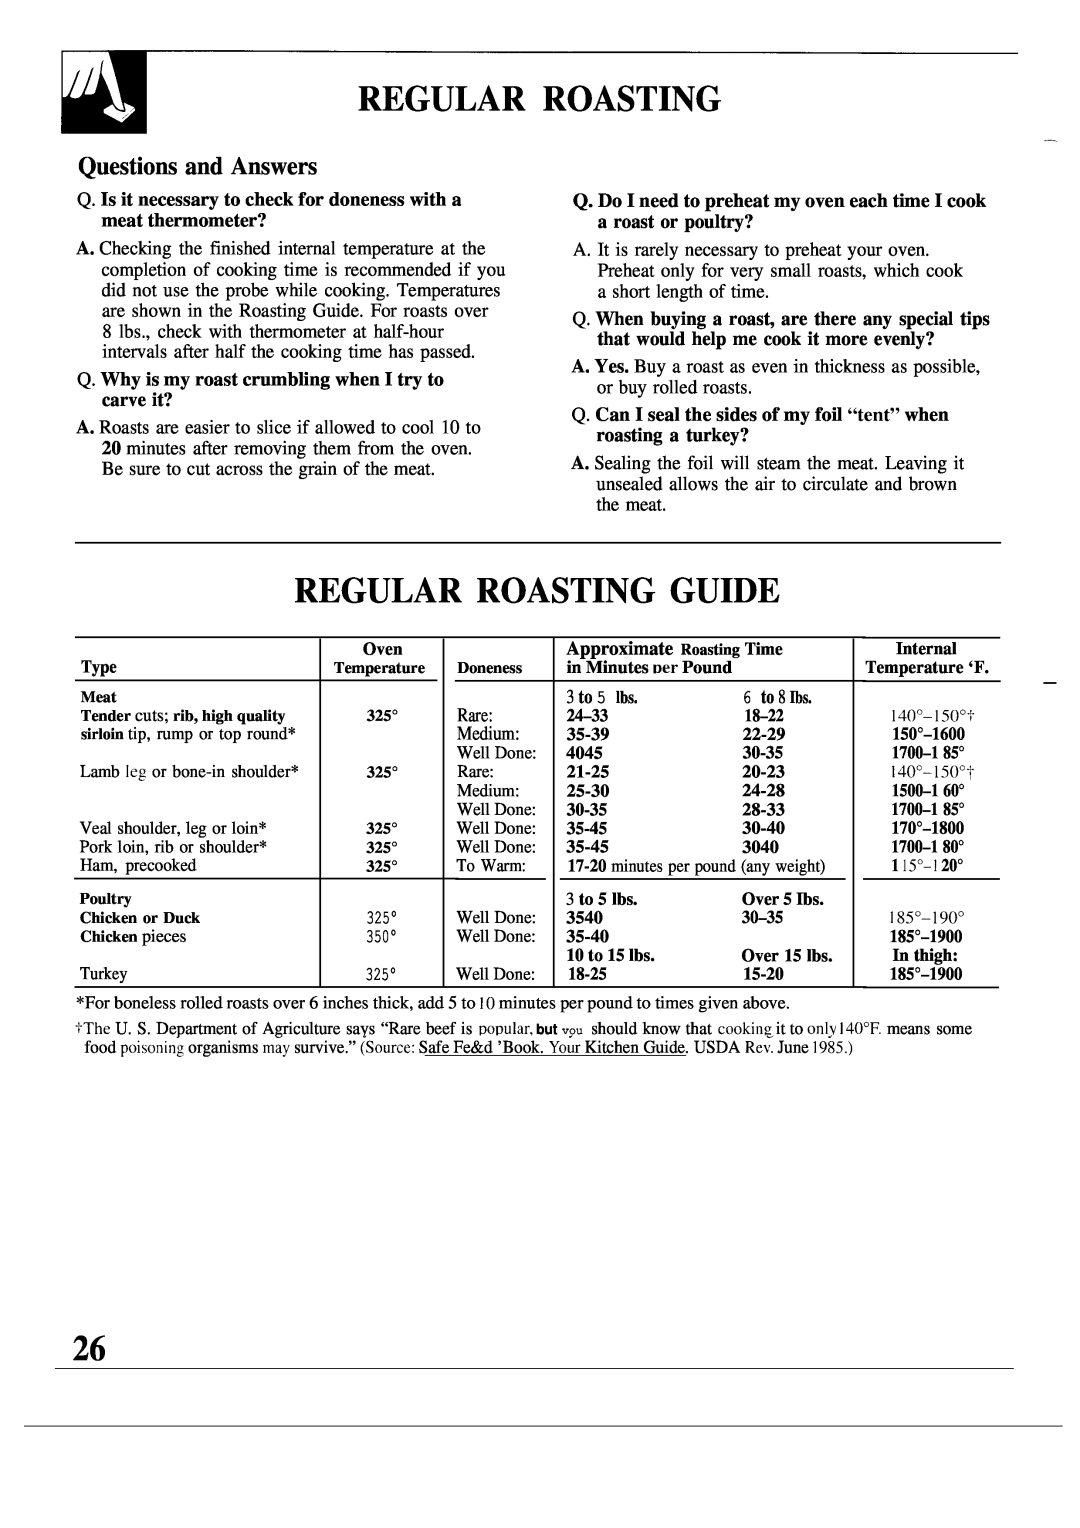 GE JKP17, MNU099 warranty Regular Roasting Guide, Questions and Answers 